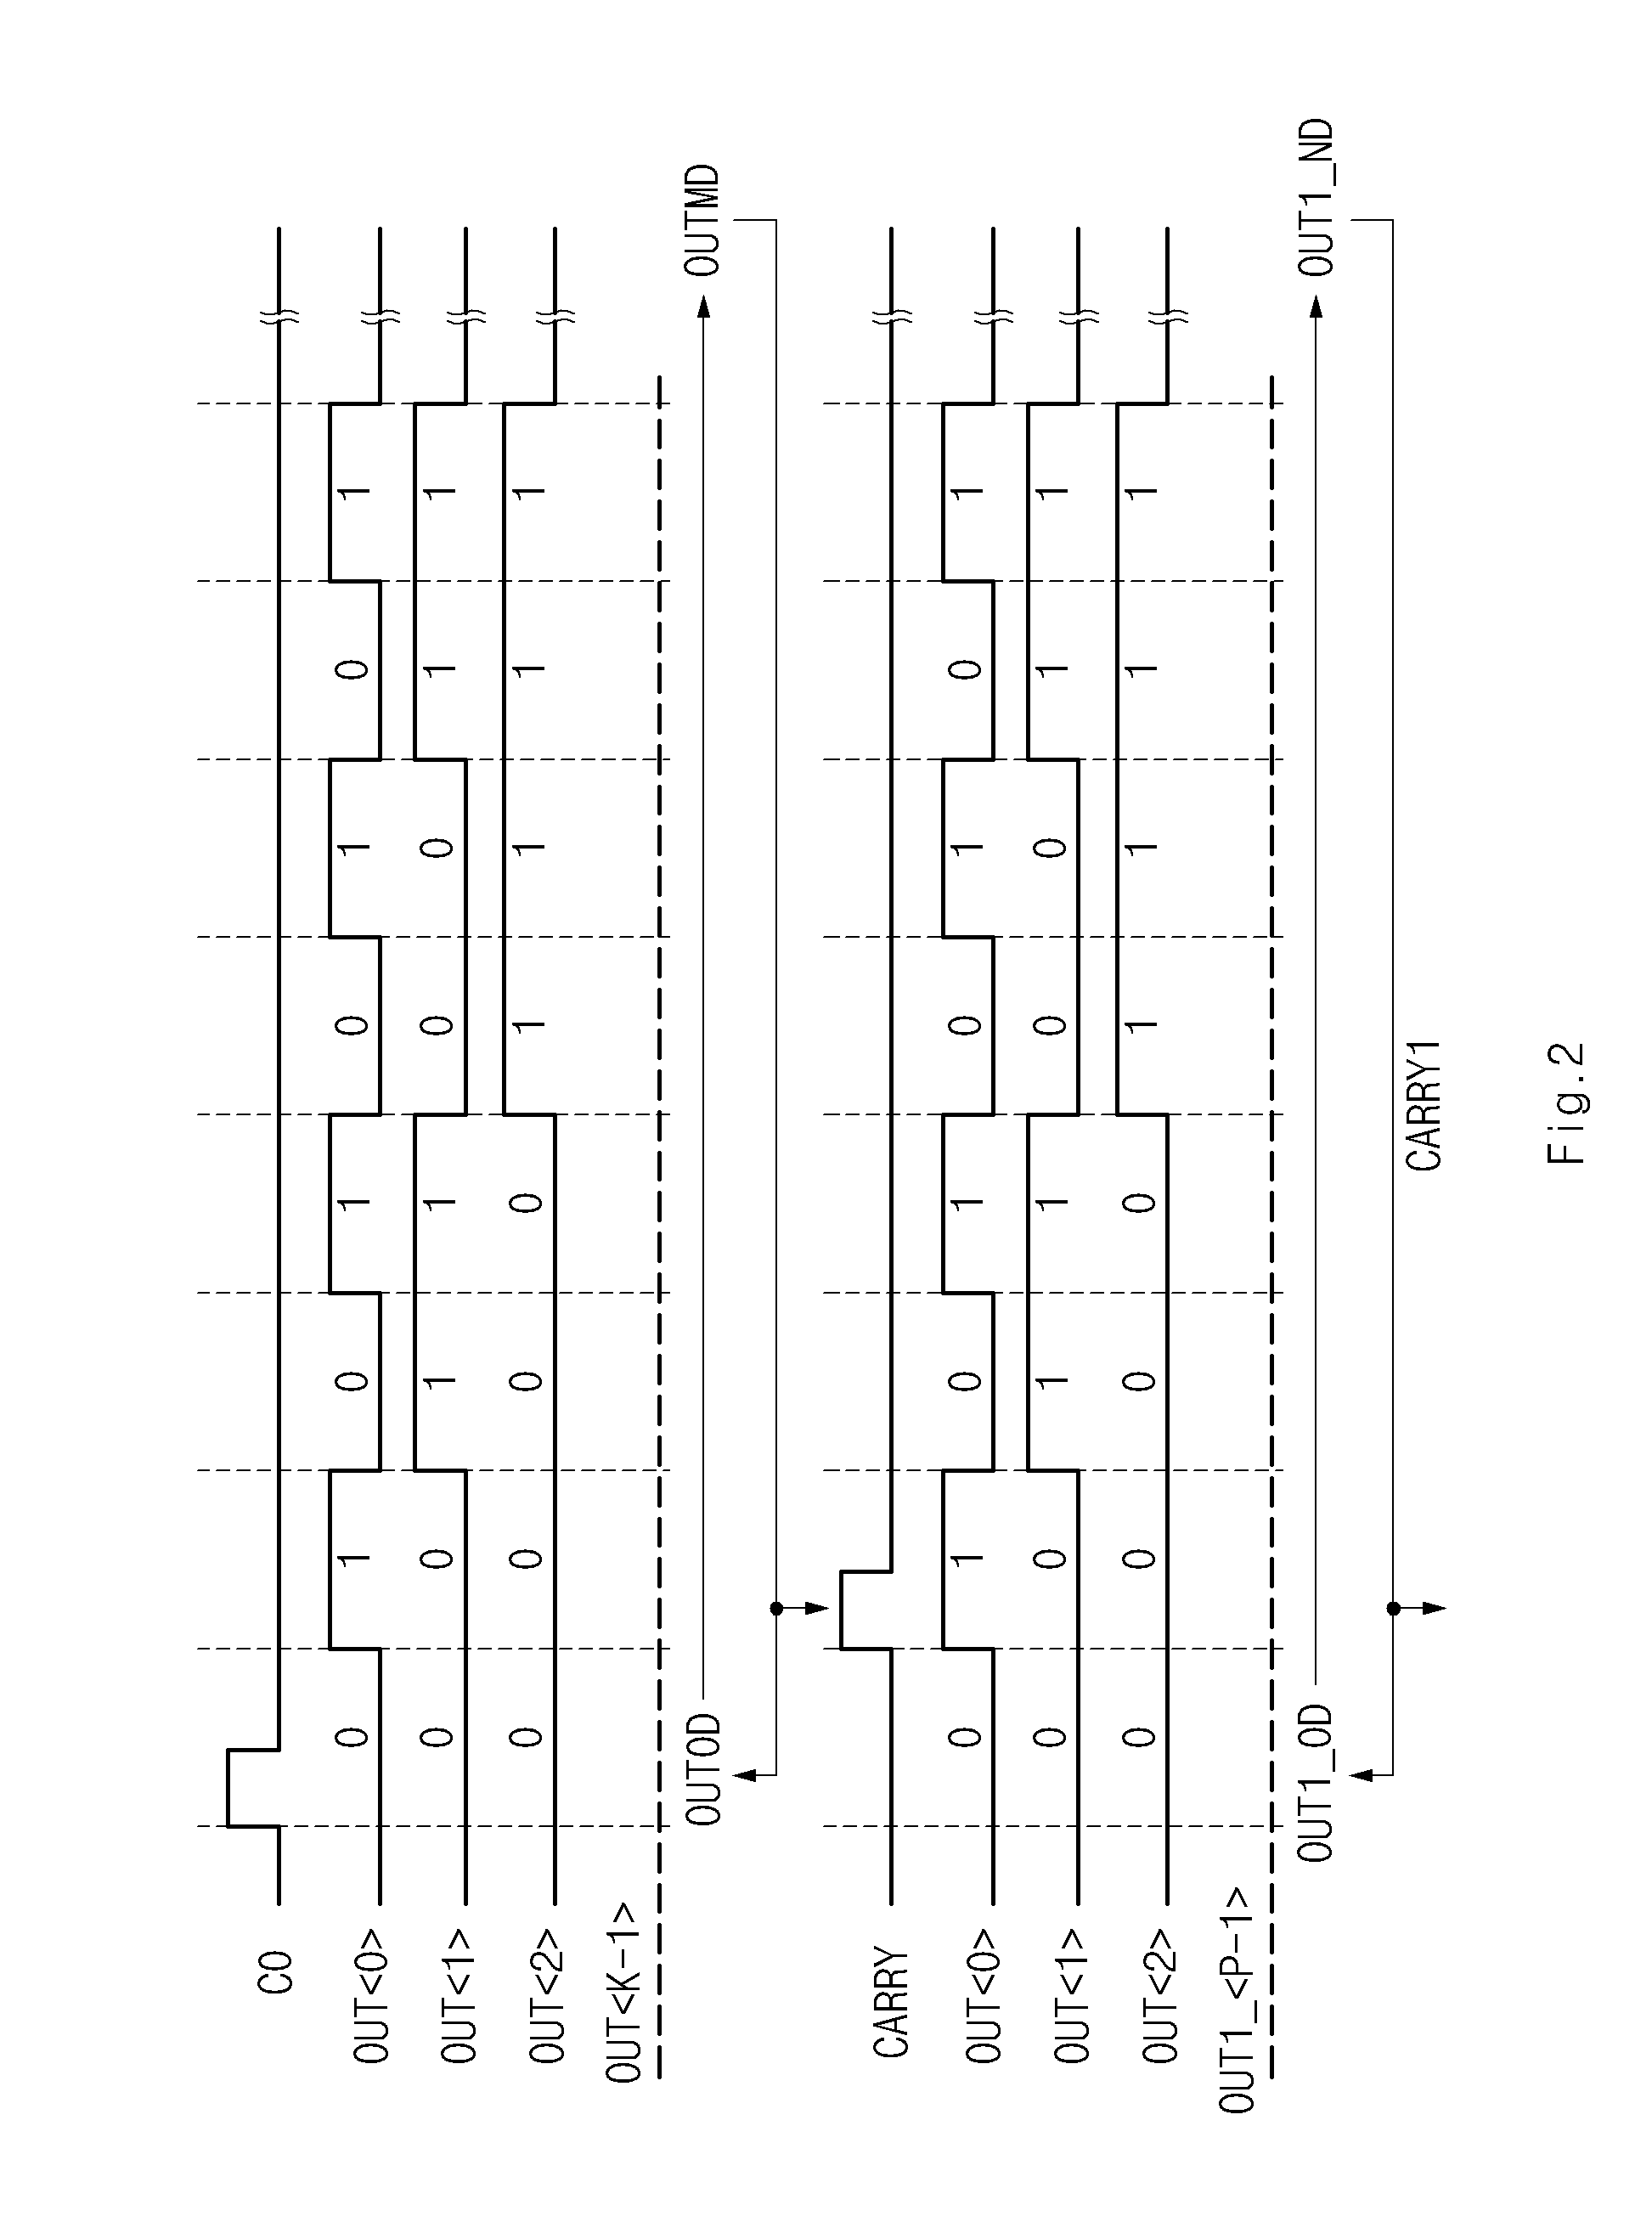 Semiconductor device and method of operation